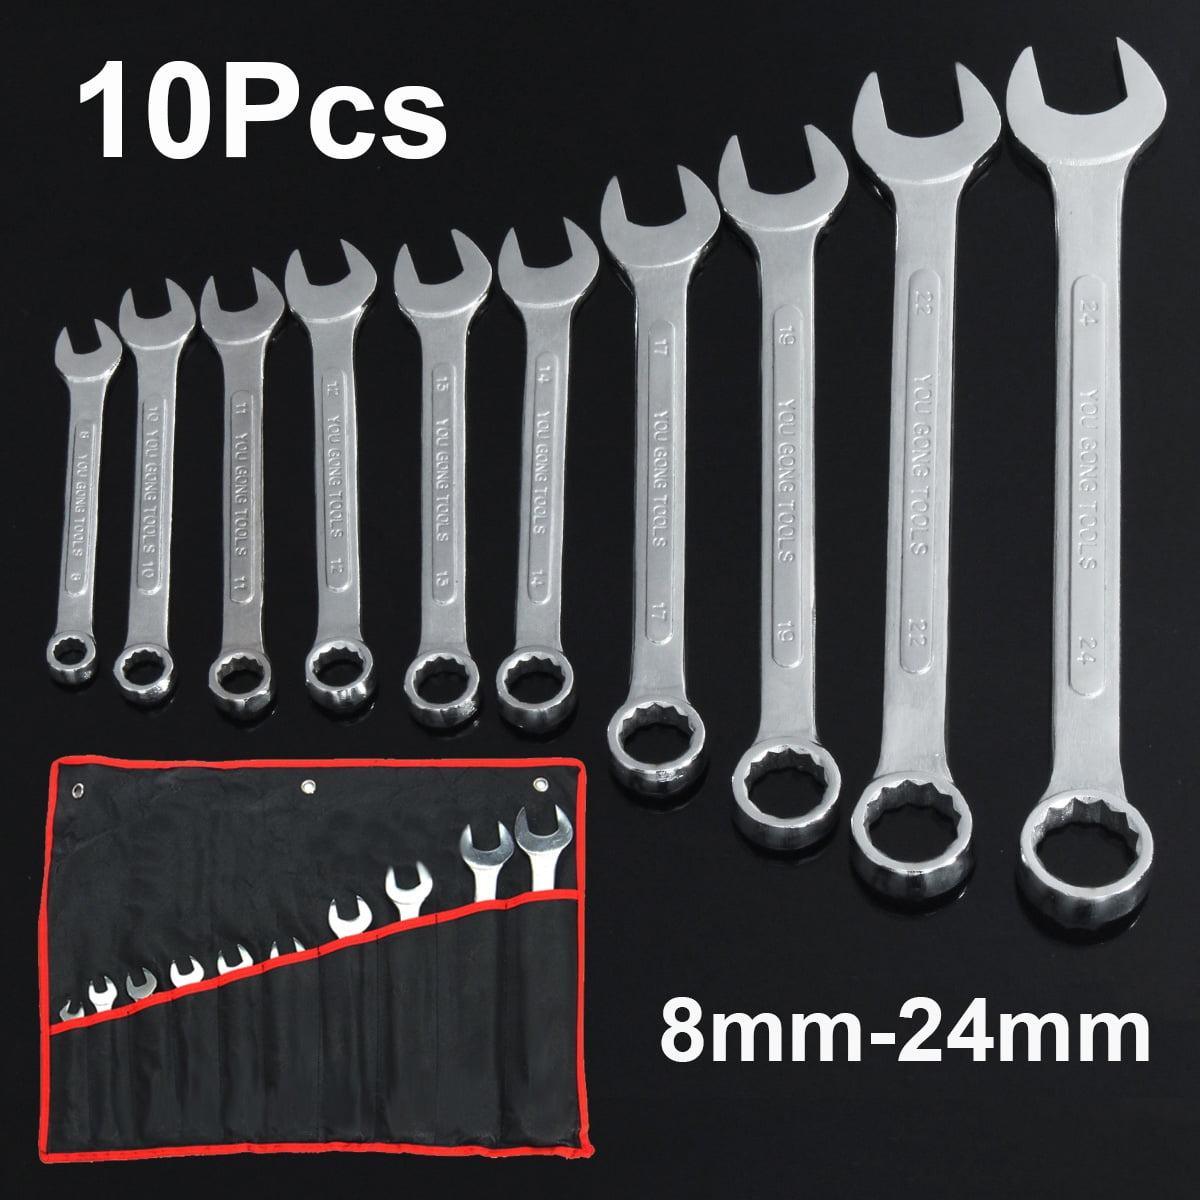 Set of 10pcs 8mm-24mm Open and Box End Metric Spanner FINDER BS192183D Combination Wrench